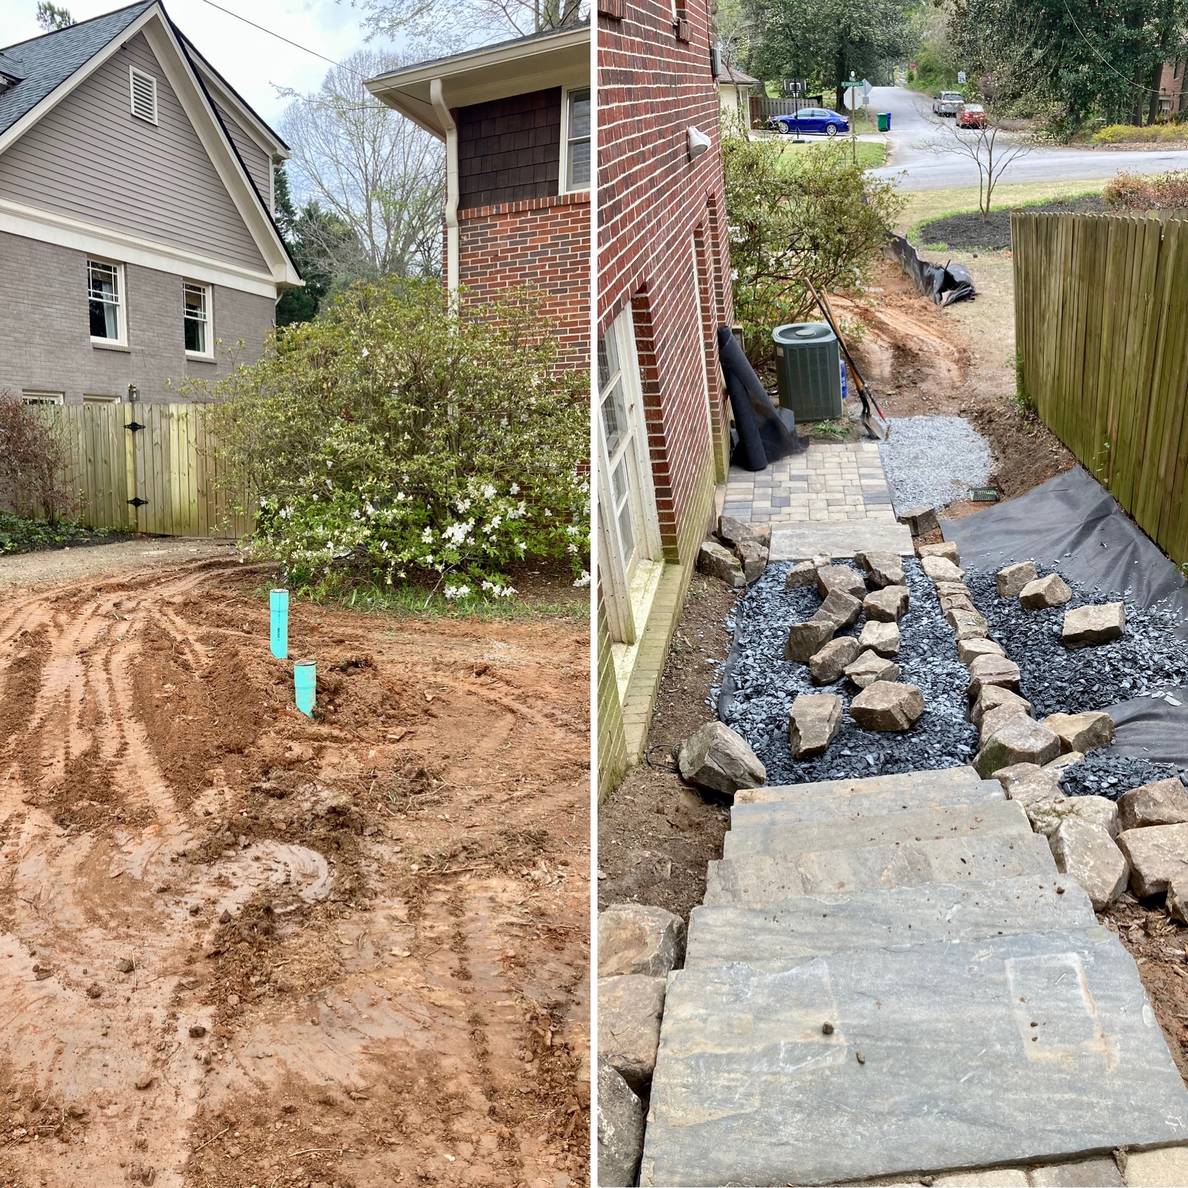 2 photos. One shows a clay area with 2 pipes popping out of the ground. Yesterday that area was a big pit in the ground. The other shows a side yard step area with stone treads, boulders, and slate chips.